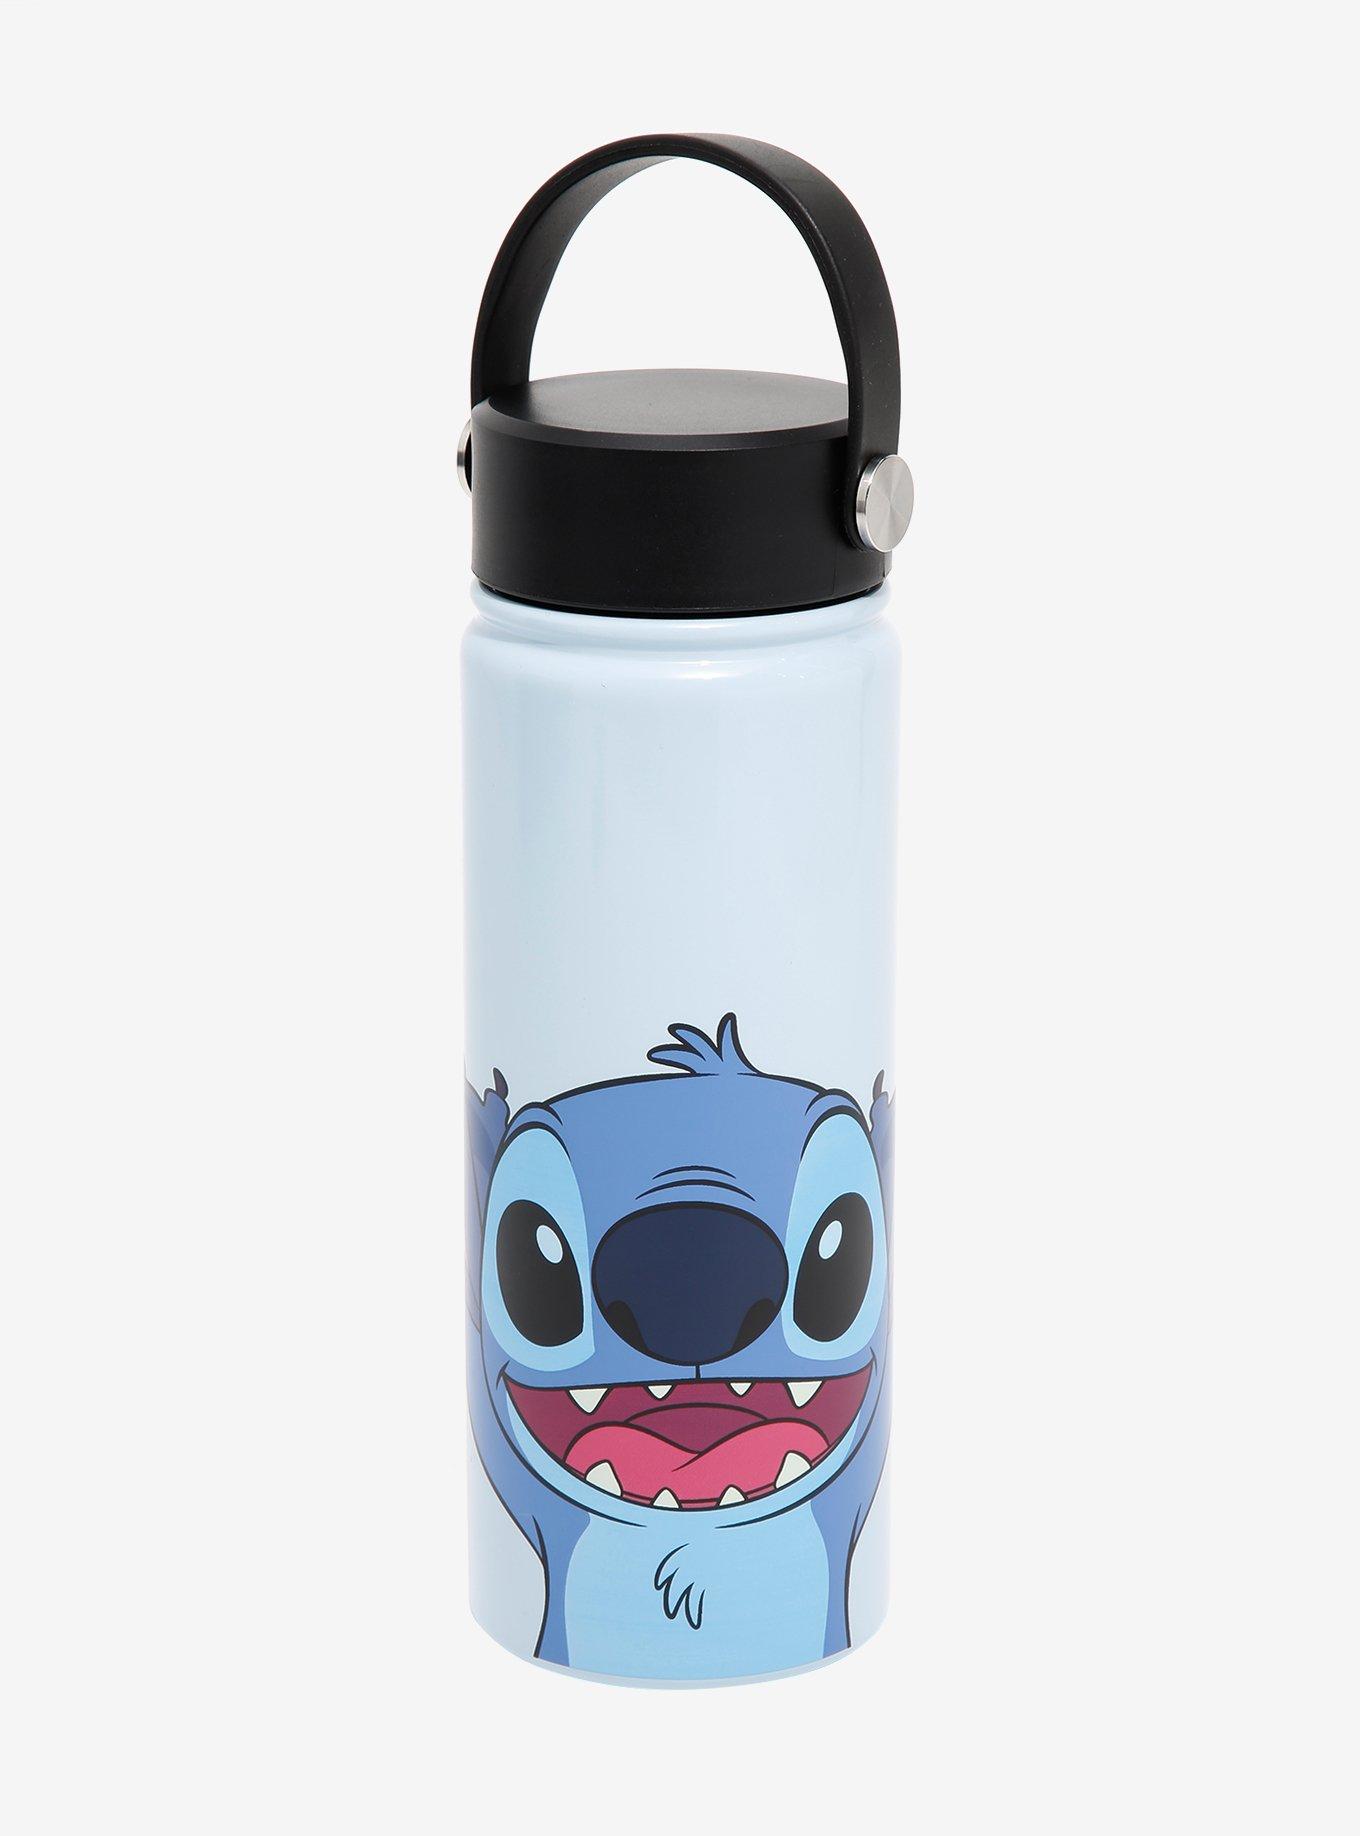 Minnie Mouse Stainless Steel Water Bottle and Cooler Tote